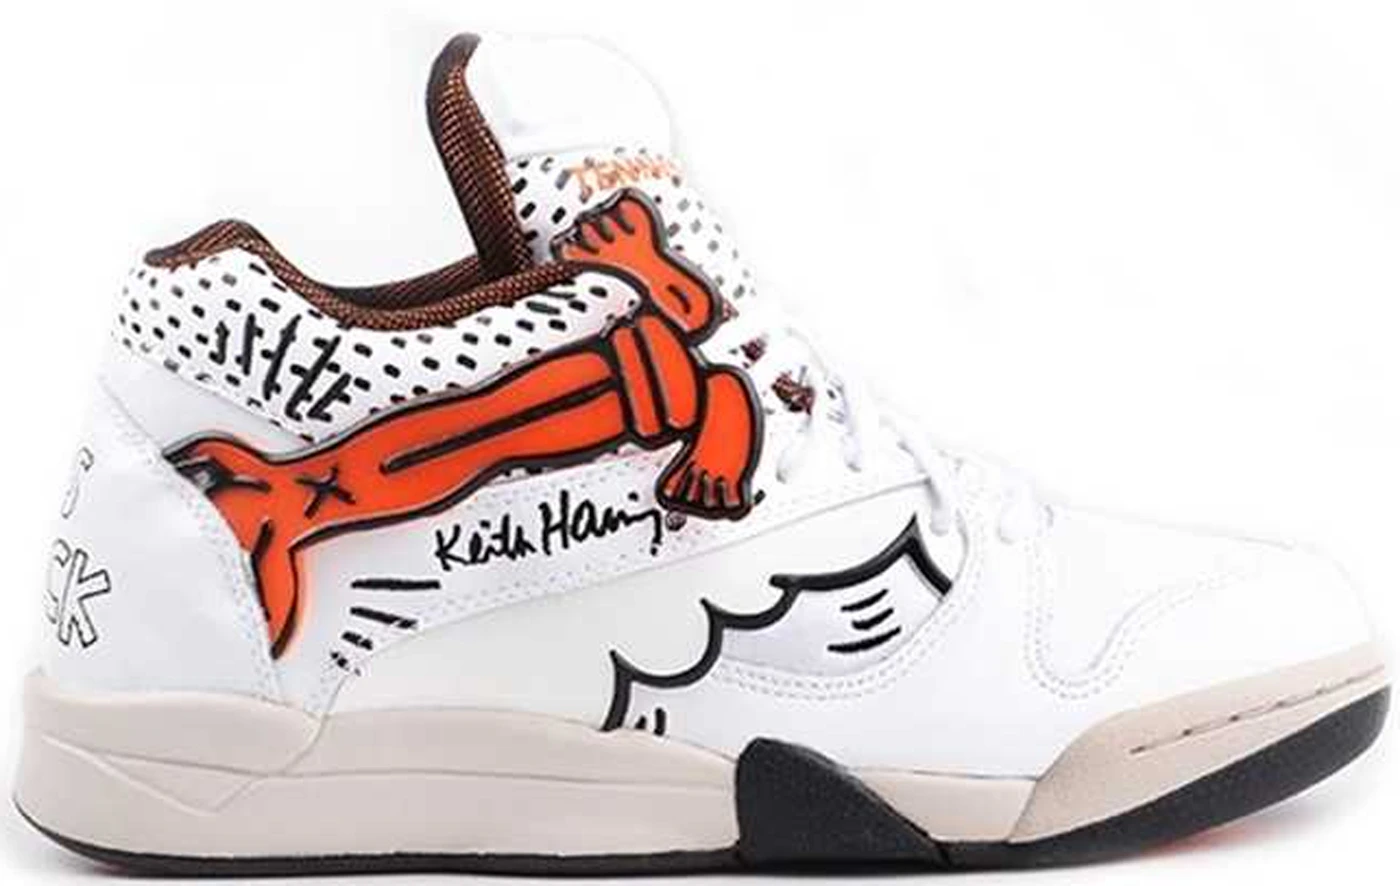 Court Victory Keith Haring M40330 - ES